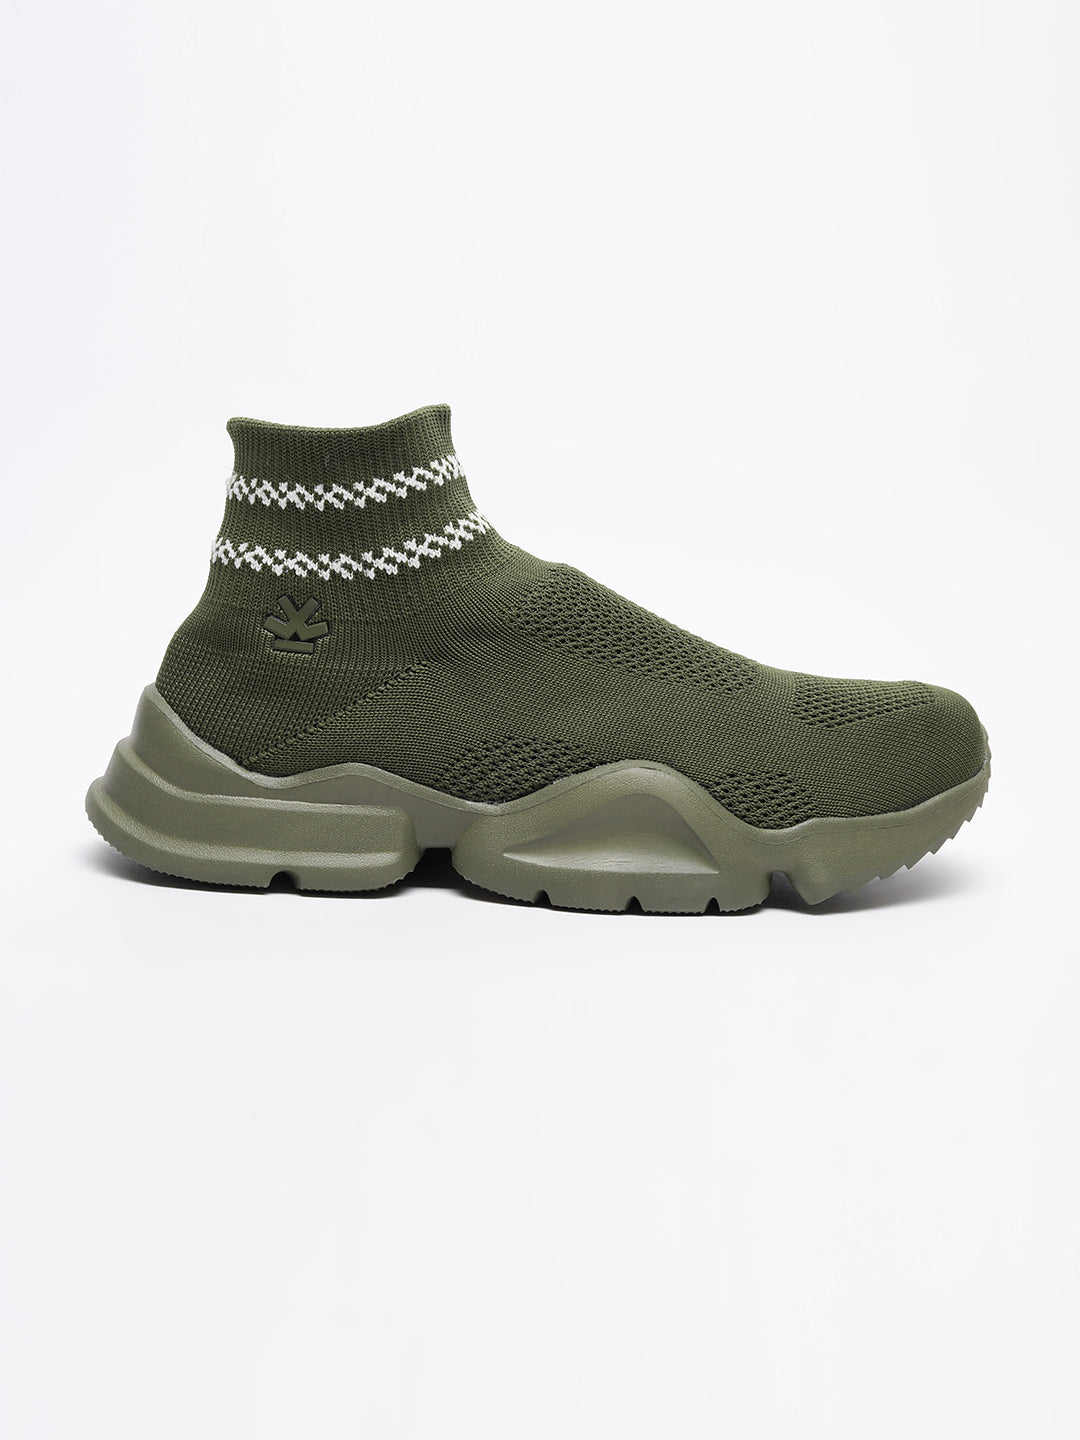 Olive Athleisure Shoes